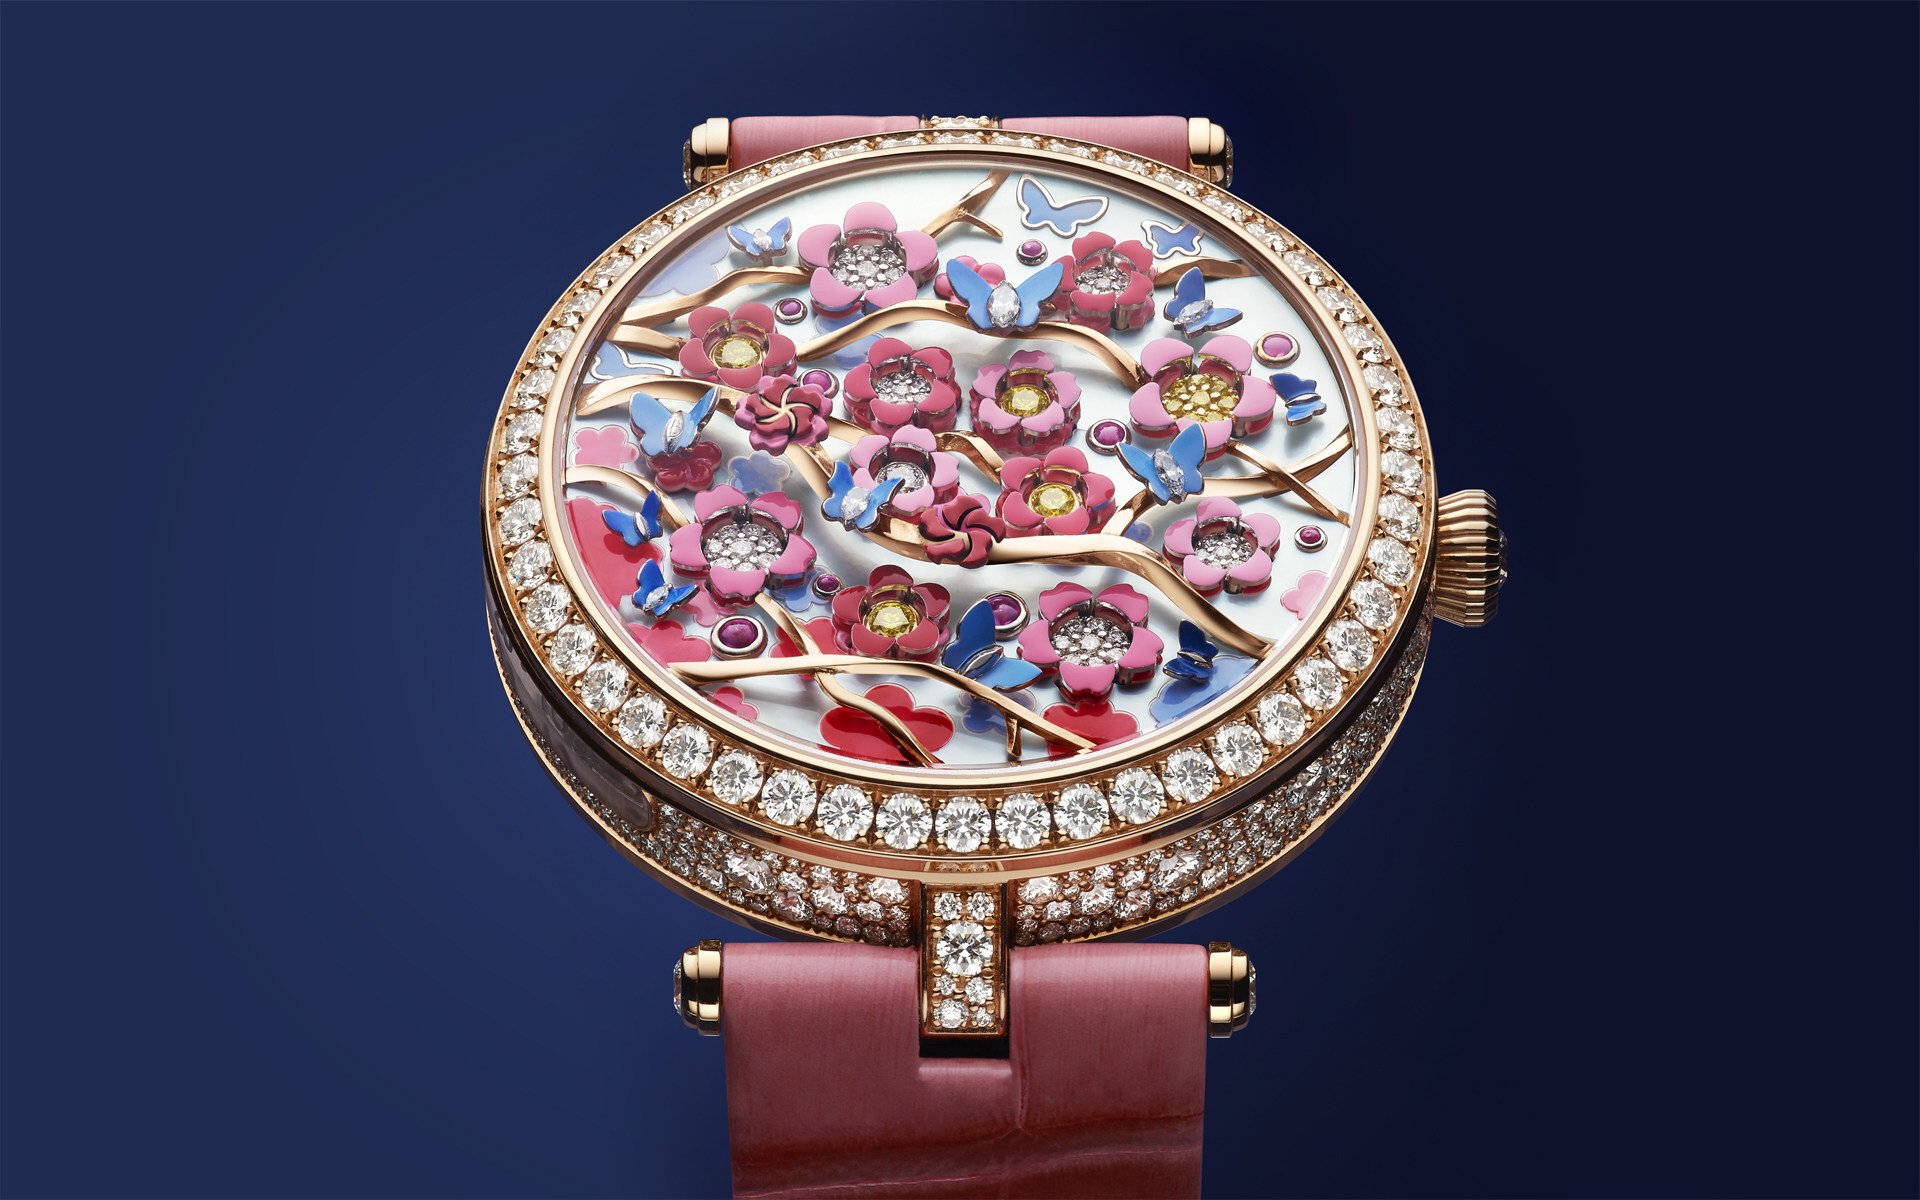 The 4 most stunning new timepieces at Watches and Wonders 2022: Cartier's  Masse Mystérieuse, Van Cleef & Arpels' Heures Florales, Jaeger-LeCoultre's  Rendez-Vous Dazzling Star and Grand Seiko's Kodo | South China Morning